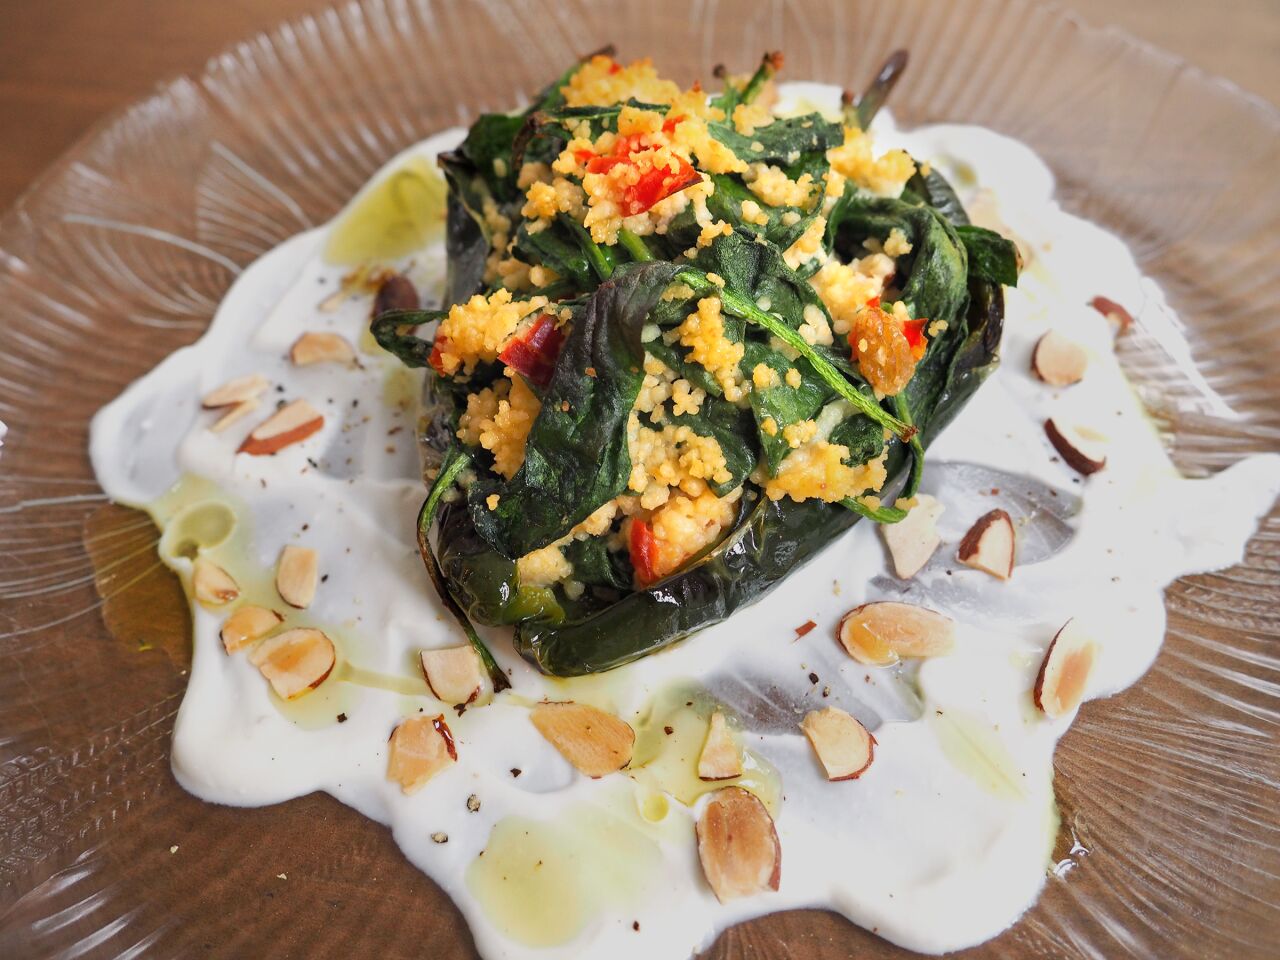 The Blue Apron couscous-stuffed poblano peppers with tahini sauce.